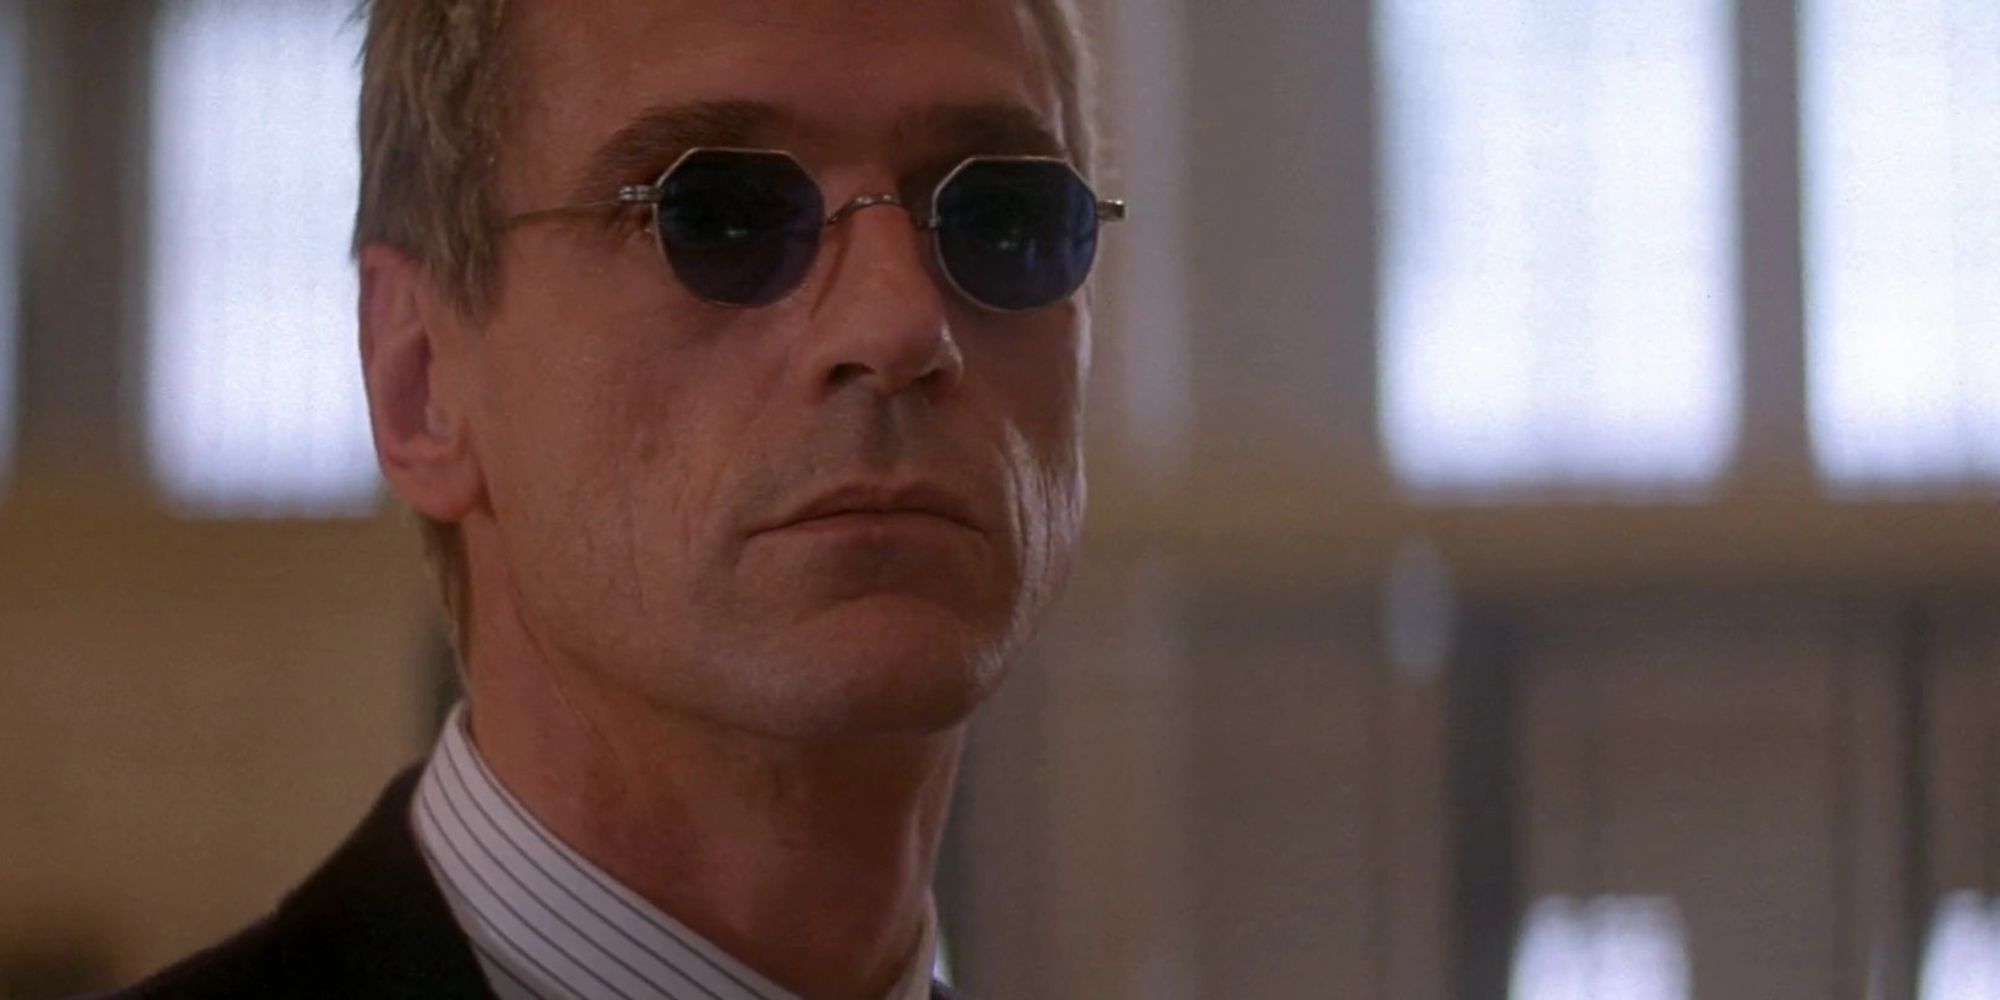 Jeremy Irons as Simon Peter Gruber wearing sunglasses in ‘Die Hard With A Vengeance’ (1995)